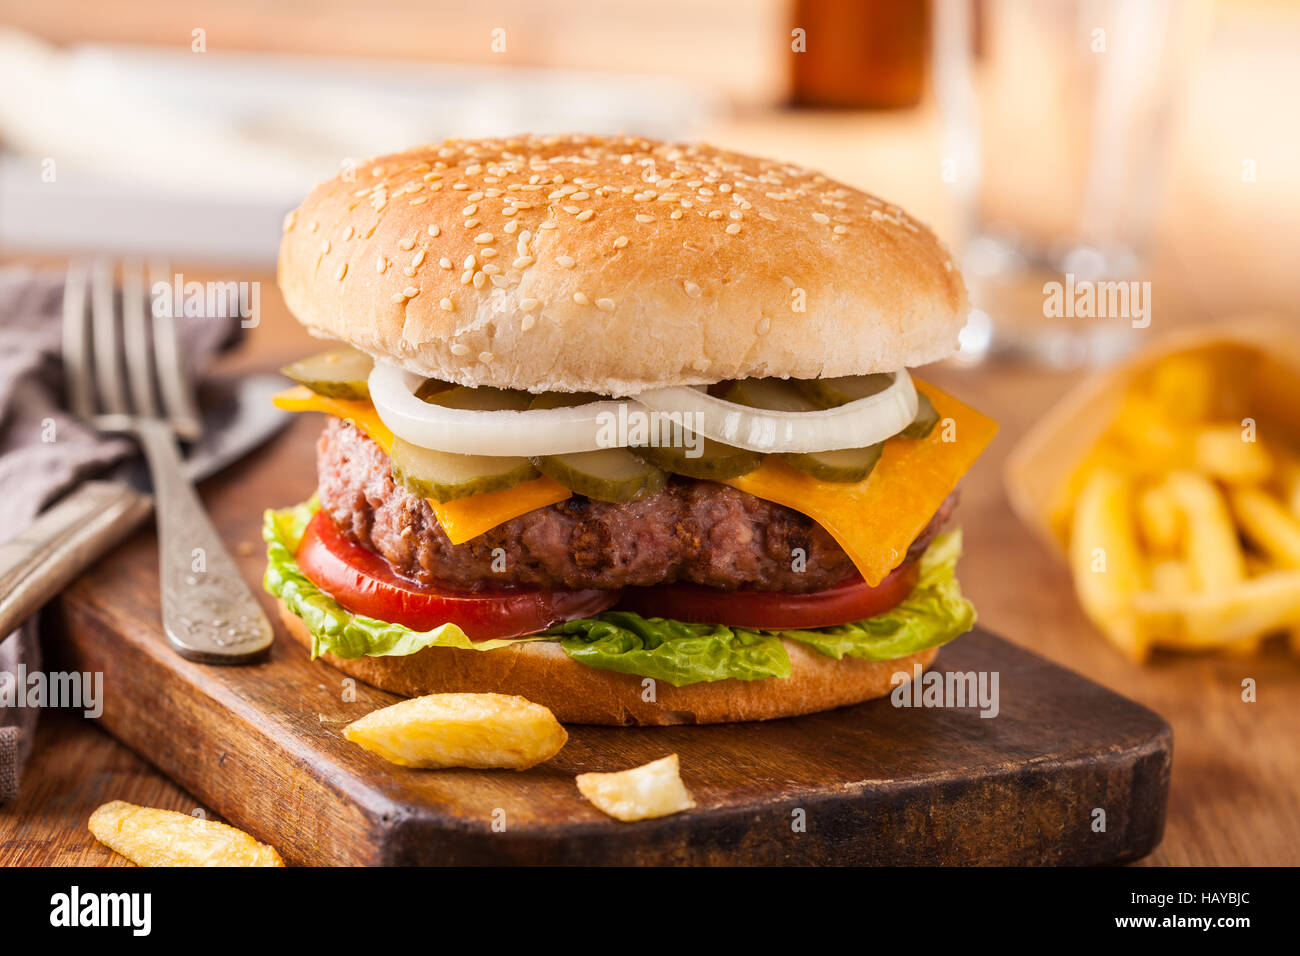 Appetizing hamburger with fries, beer on wooden cutting board. Pickles, onion, and cheddar cheese. Stock Photo